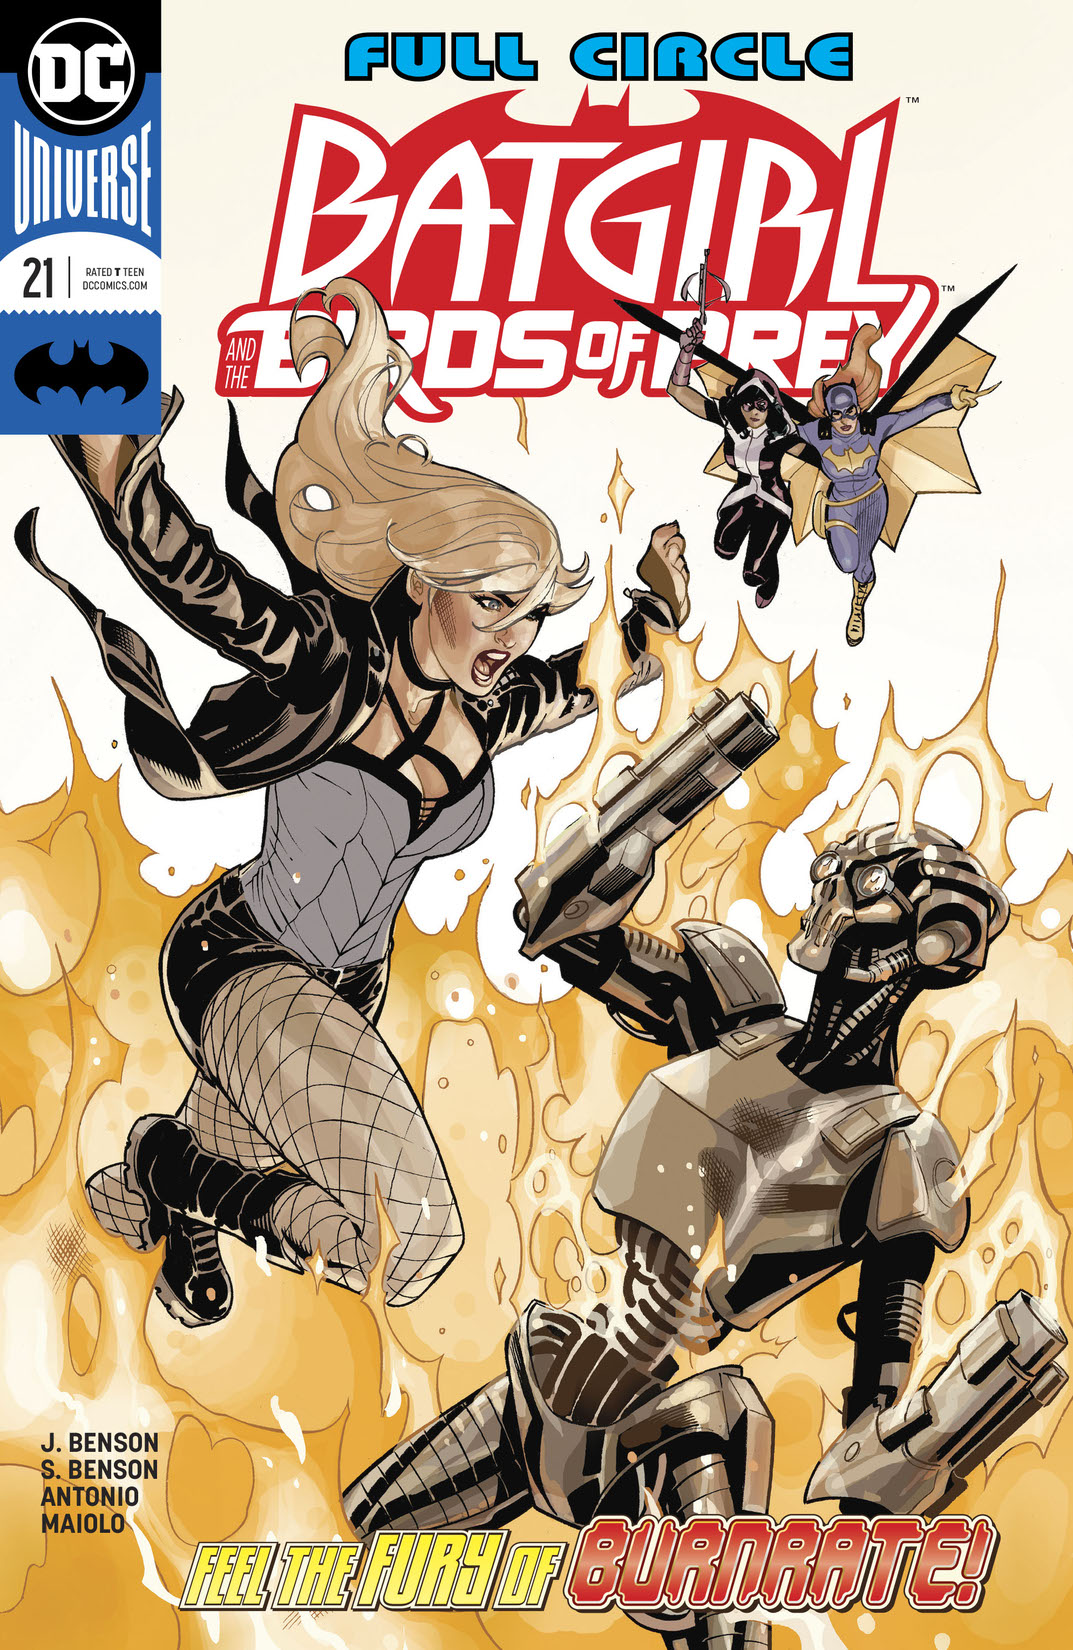 Batgirl and the Birds of Prey #21 preview images